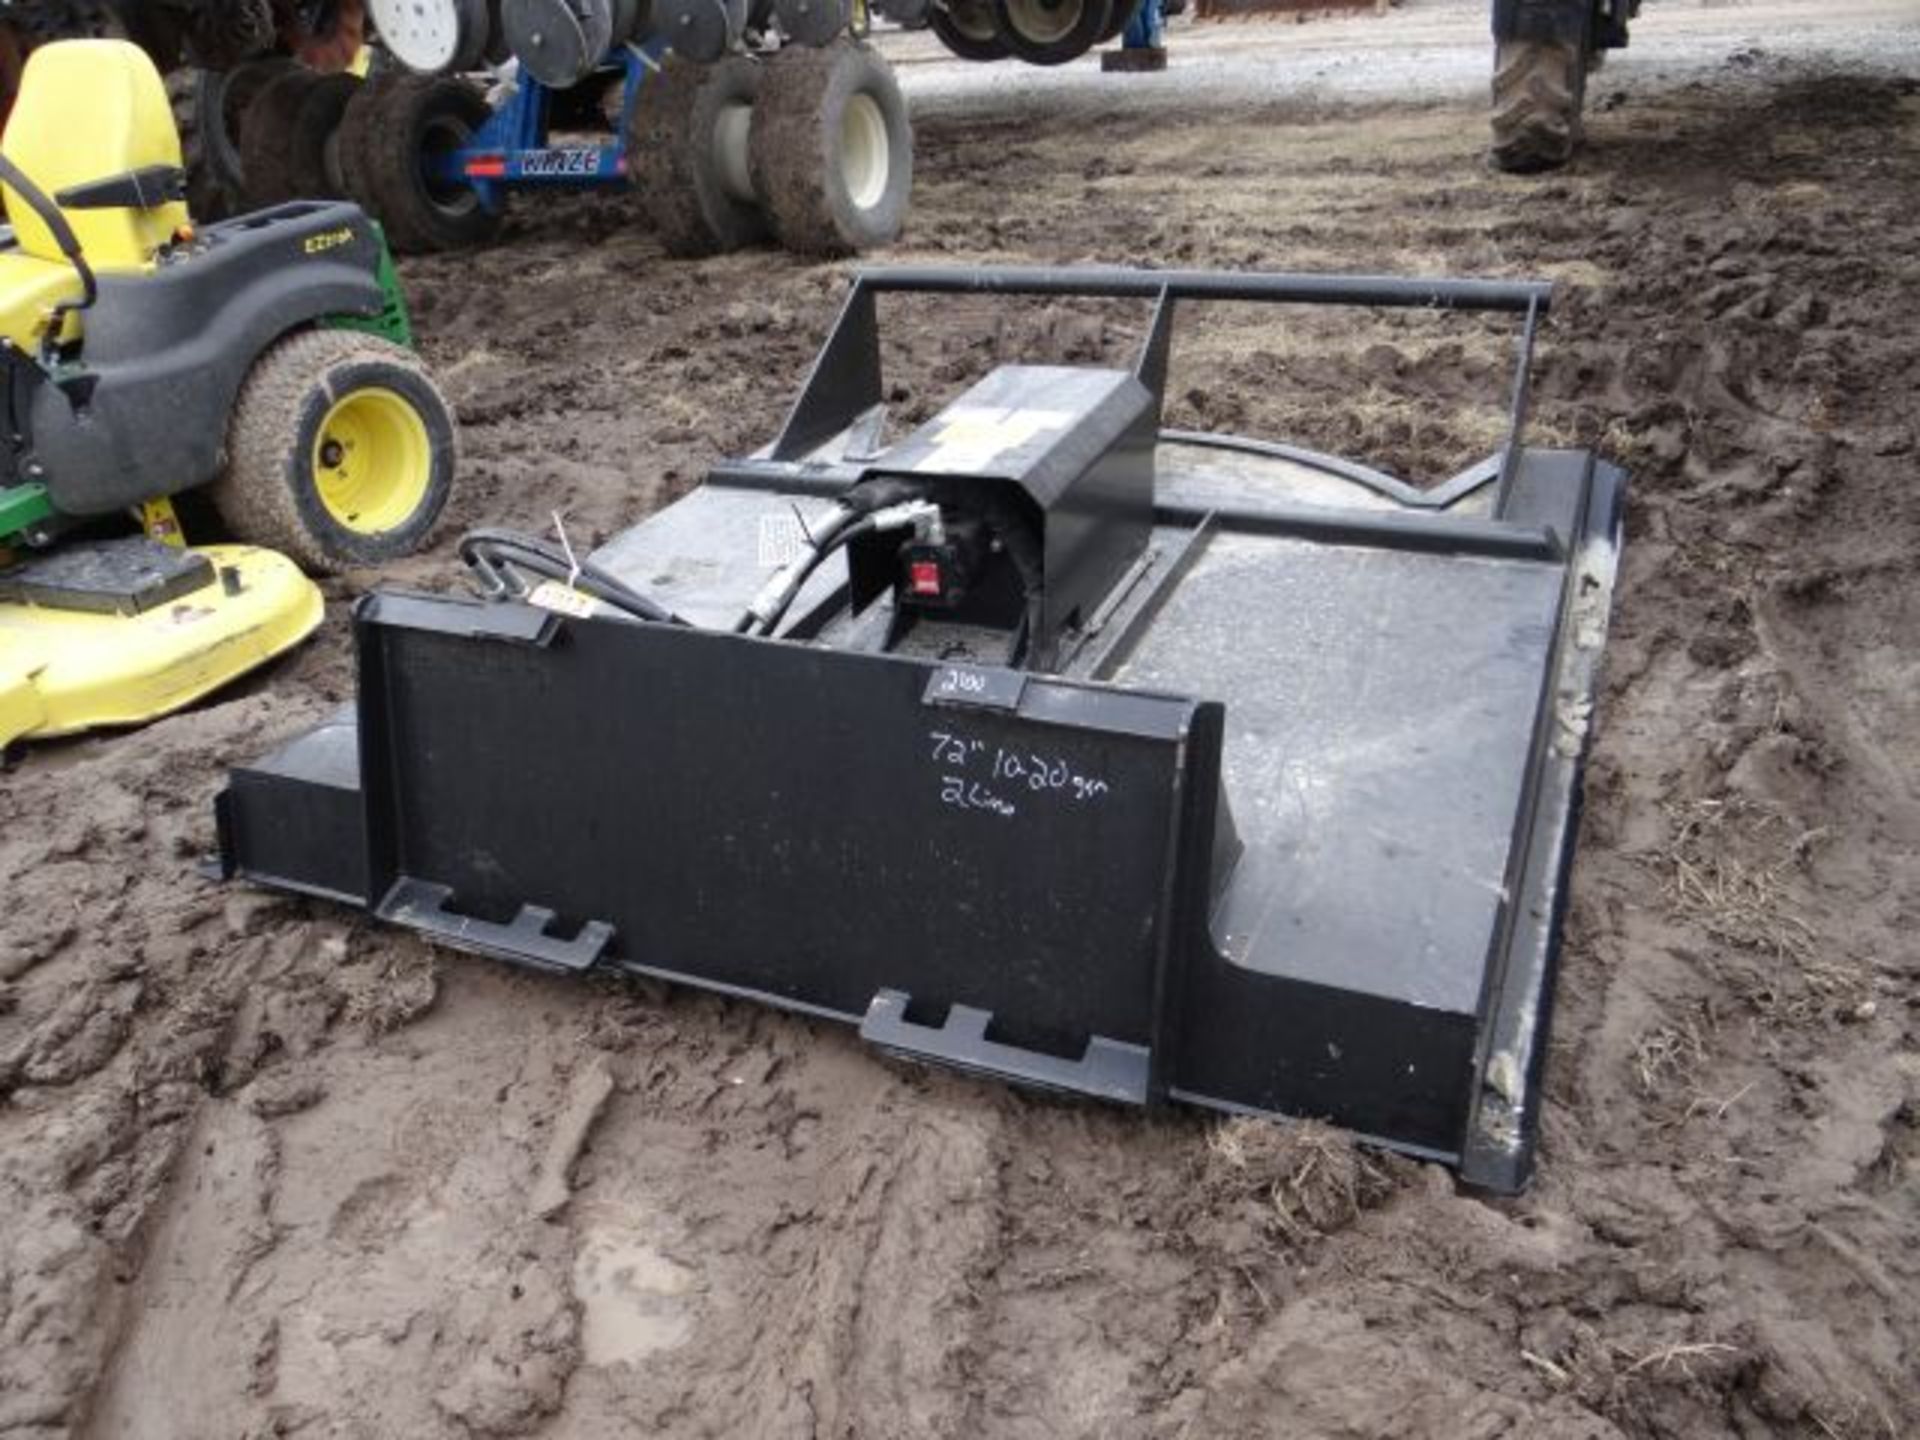 72" Cutter w/Hoses and Couplers, Skid Steer Attachment - Image 2 of 2